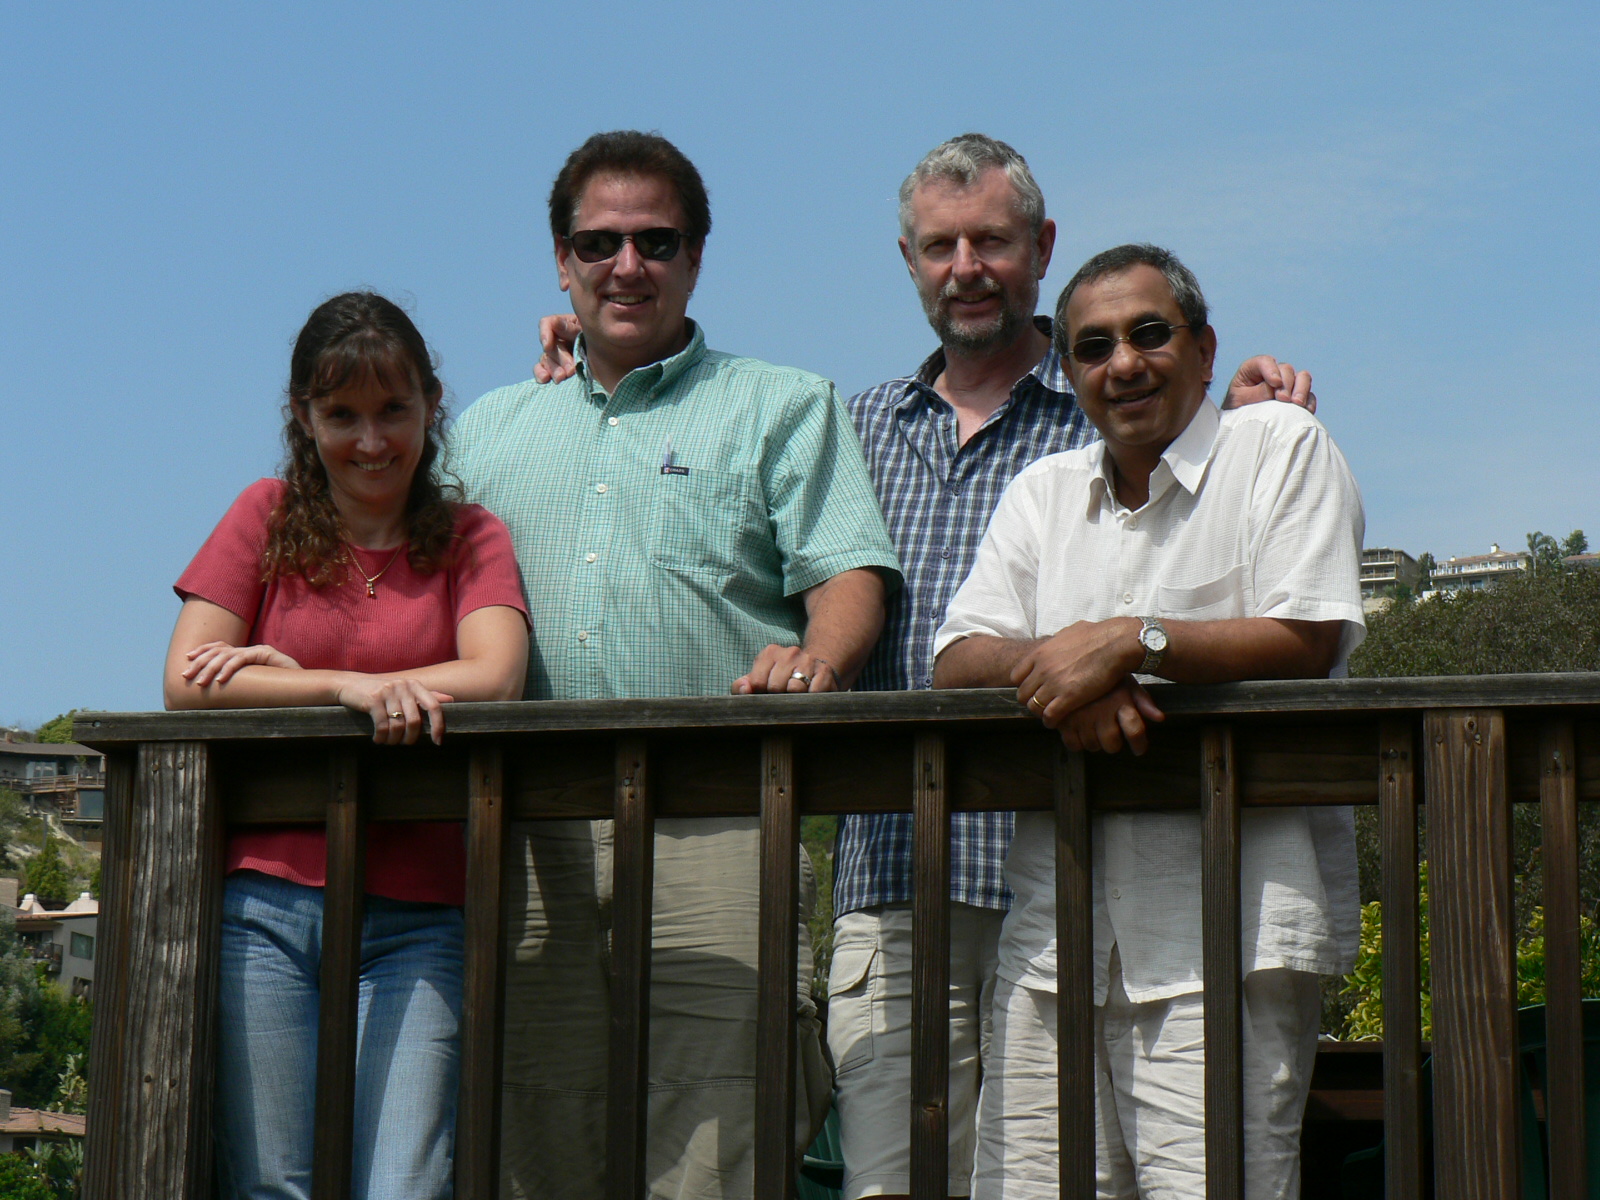 : Drs. Beeton, Pennington, Norton, and Chandy in 2008 in Southern California